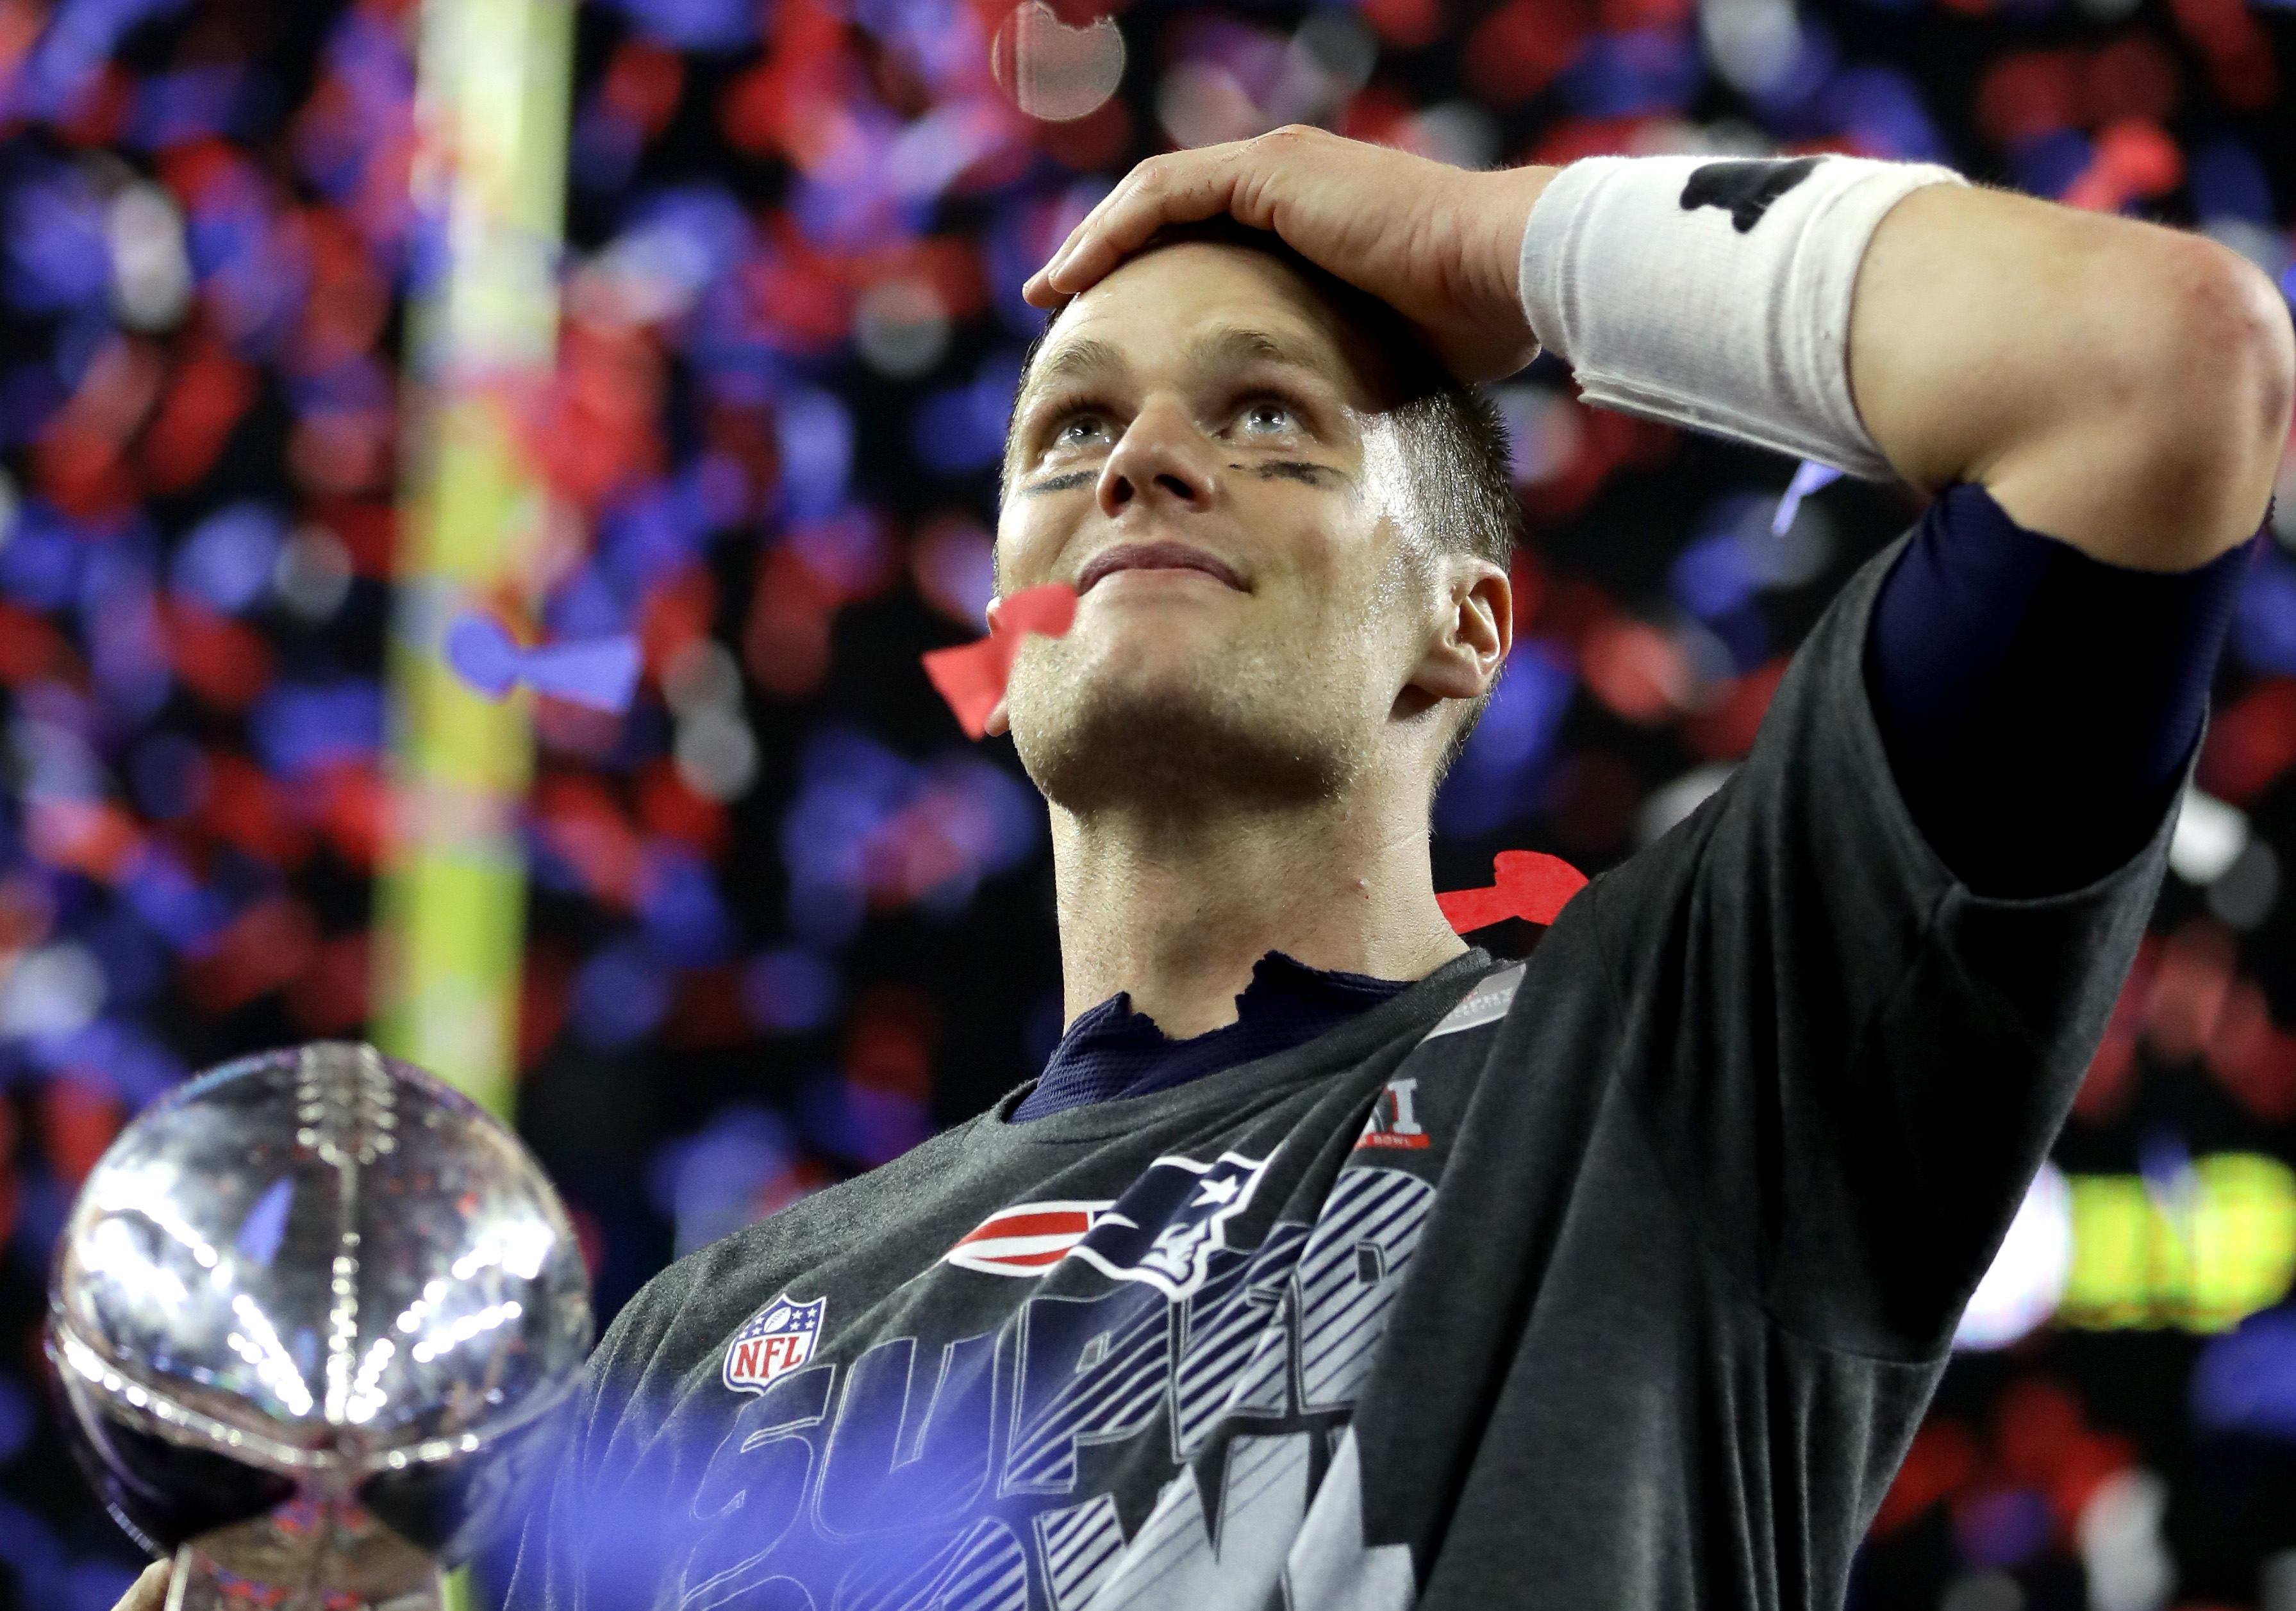 Tom Brady holds the Lombardi Trophy and looks out at the crowd | Ronald Martinez/Getty Images